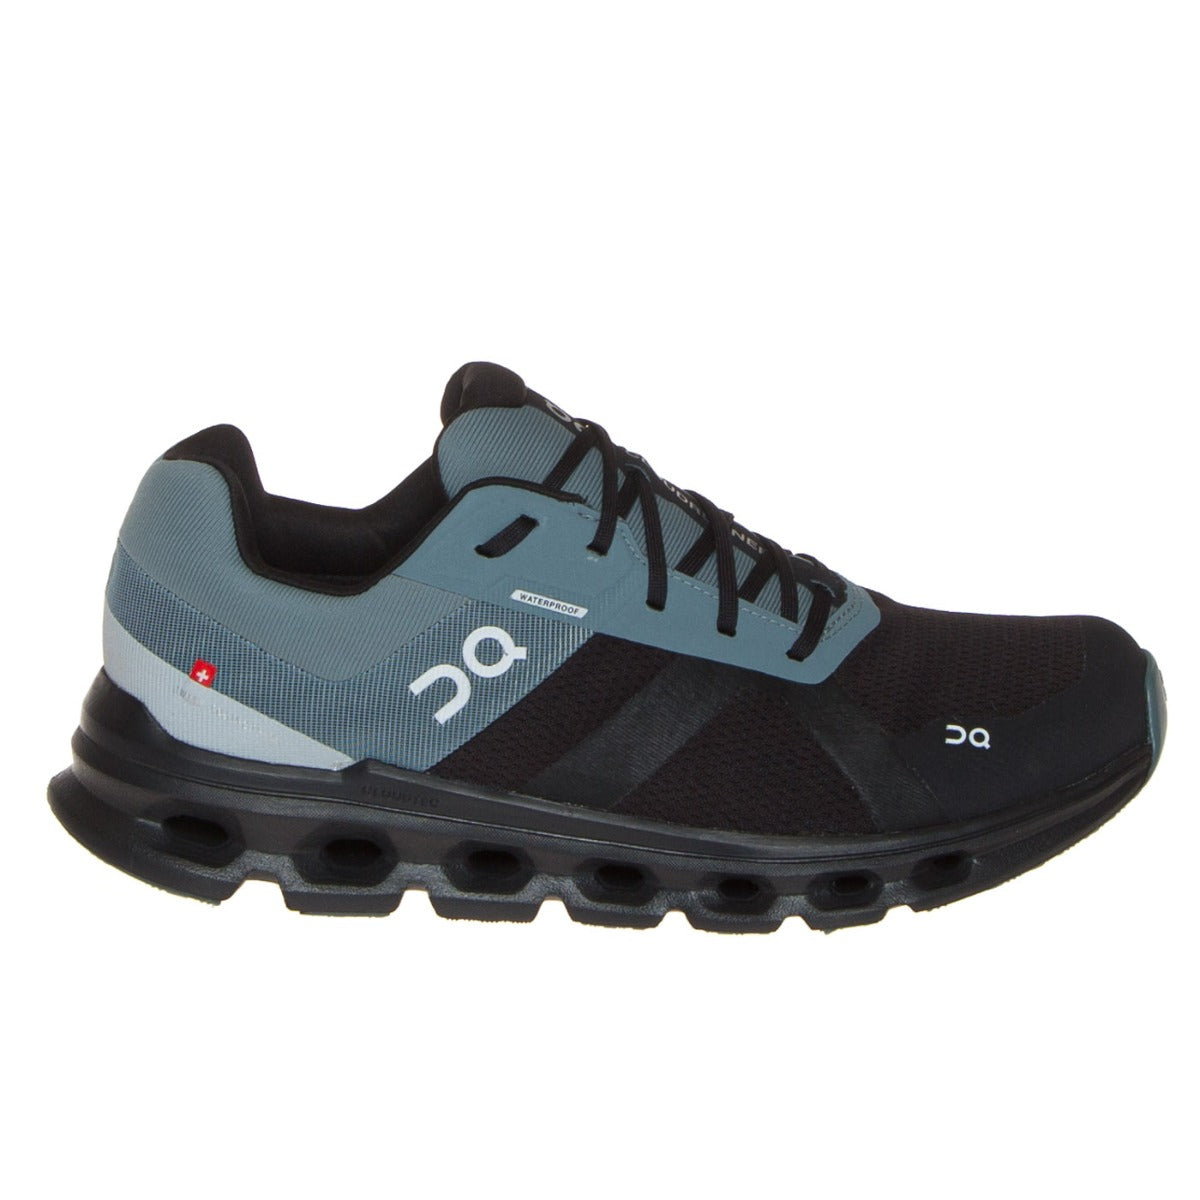 on-5298638-woterfroof-sportiva-uomo